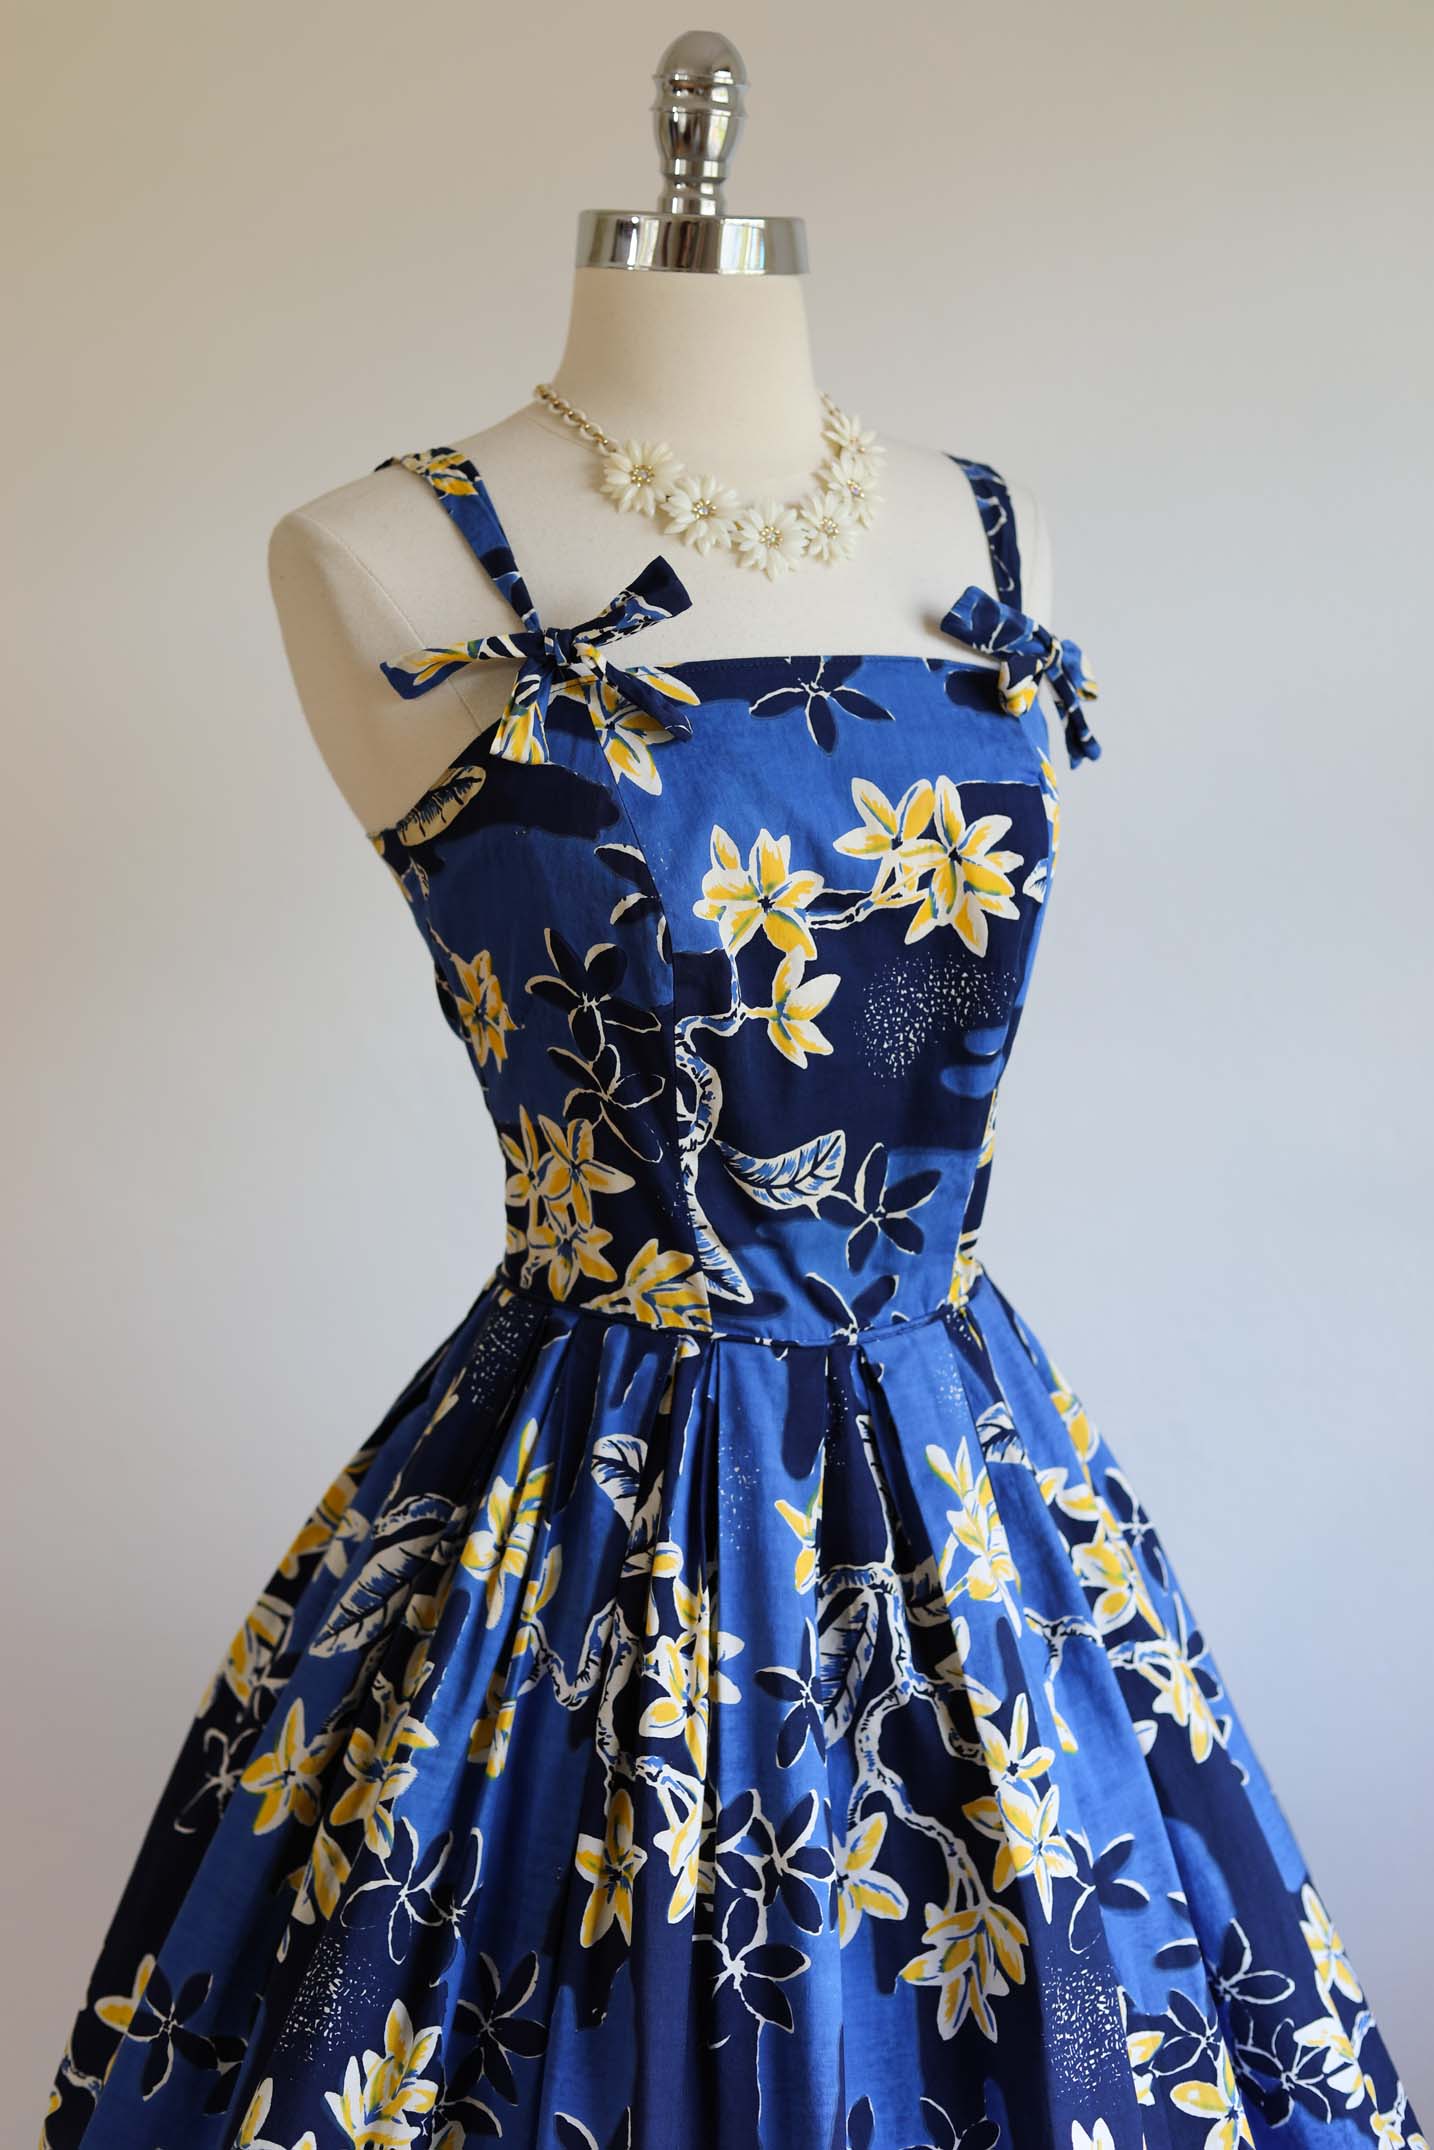 Vintage 1950s ALFRED SHAHEEN Hawaiian Dress - STUNNING Blue White Yellow Plumeria + Branches Floral Print Sundress w Tie/Bow Straps Size XS